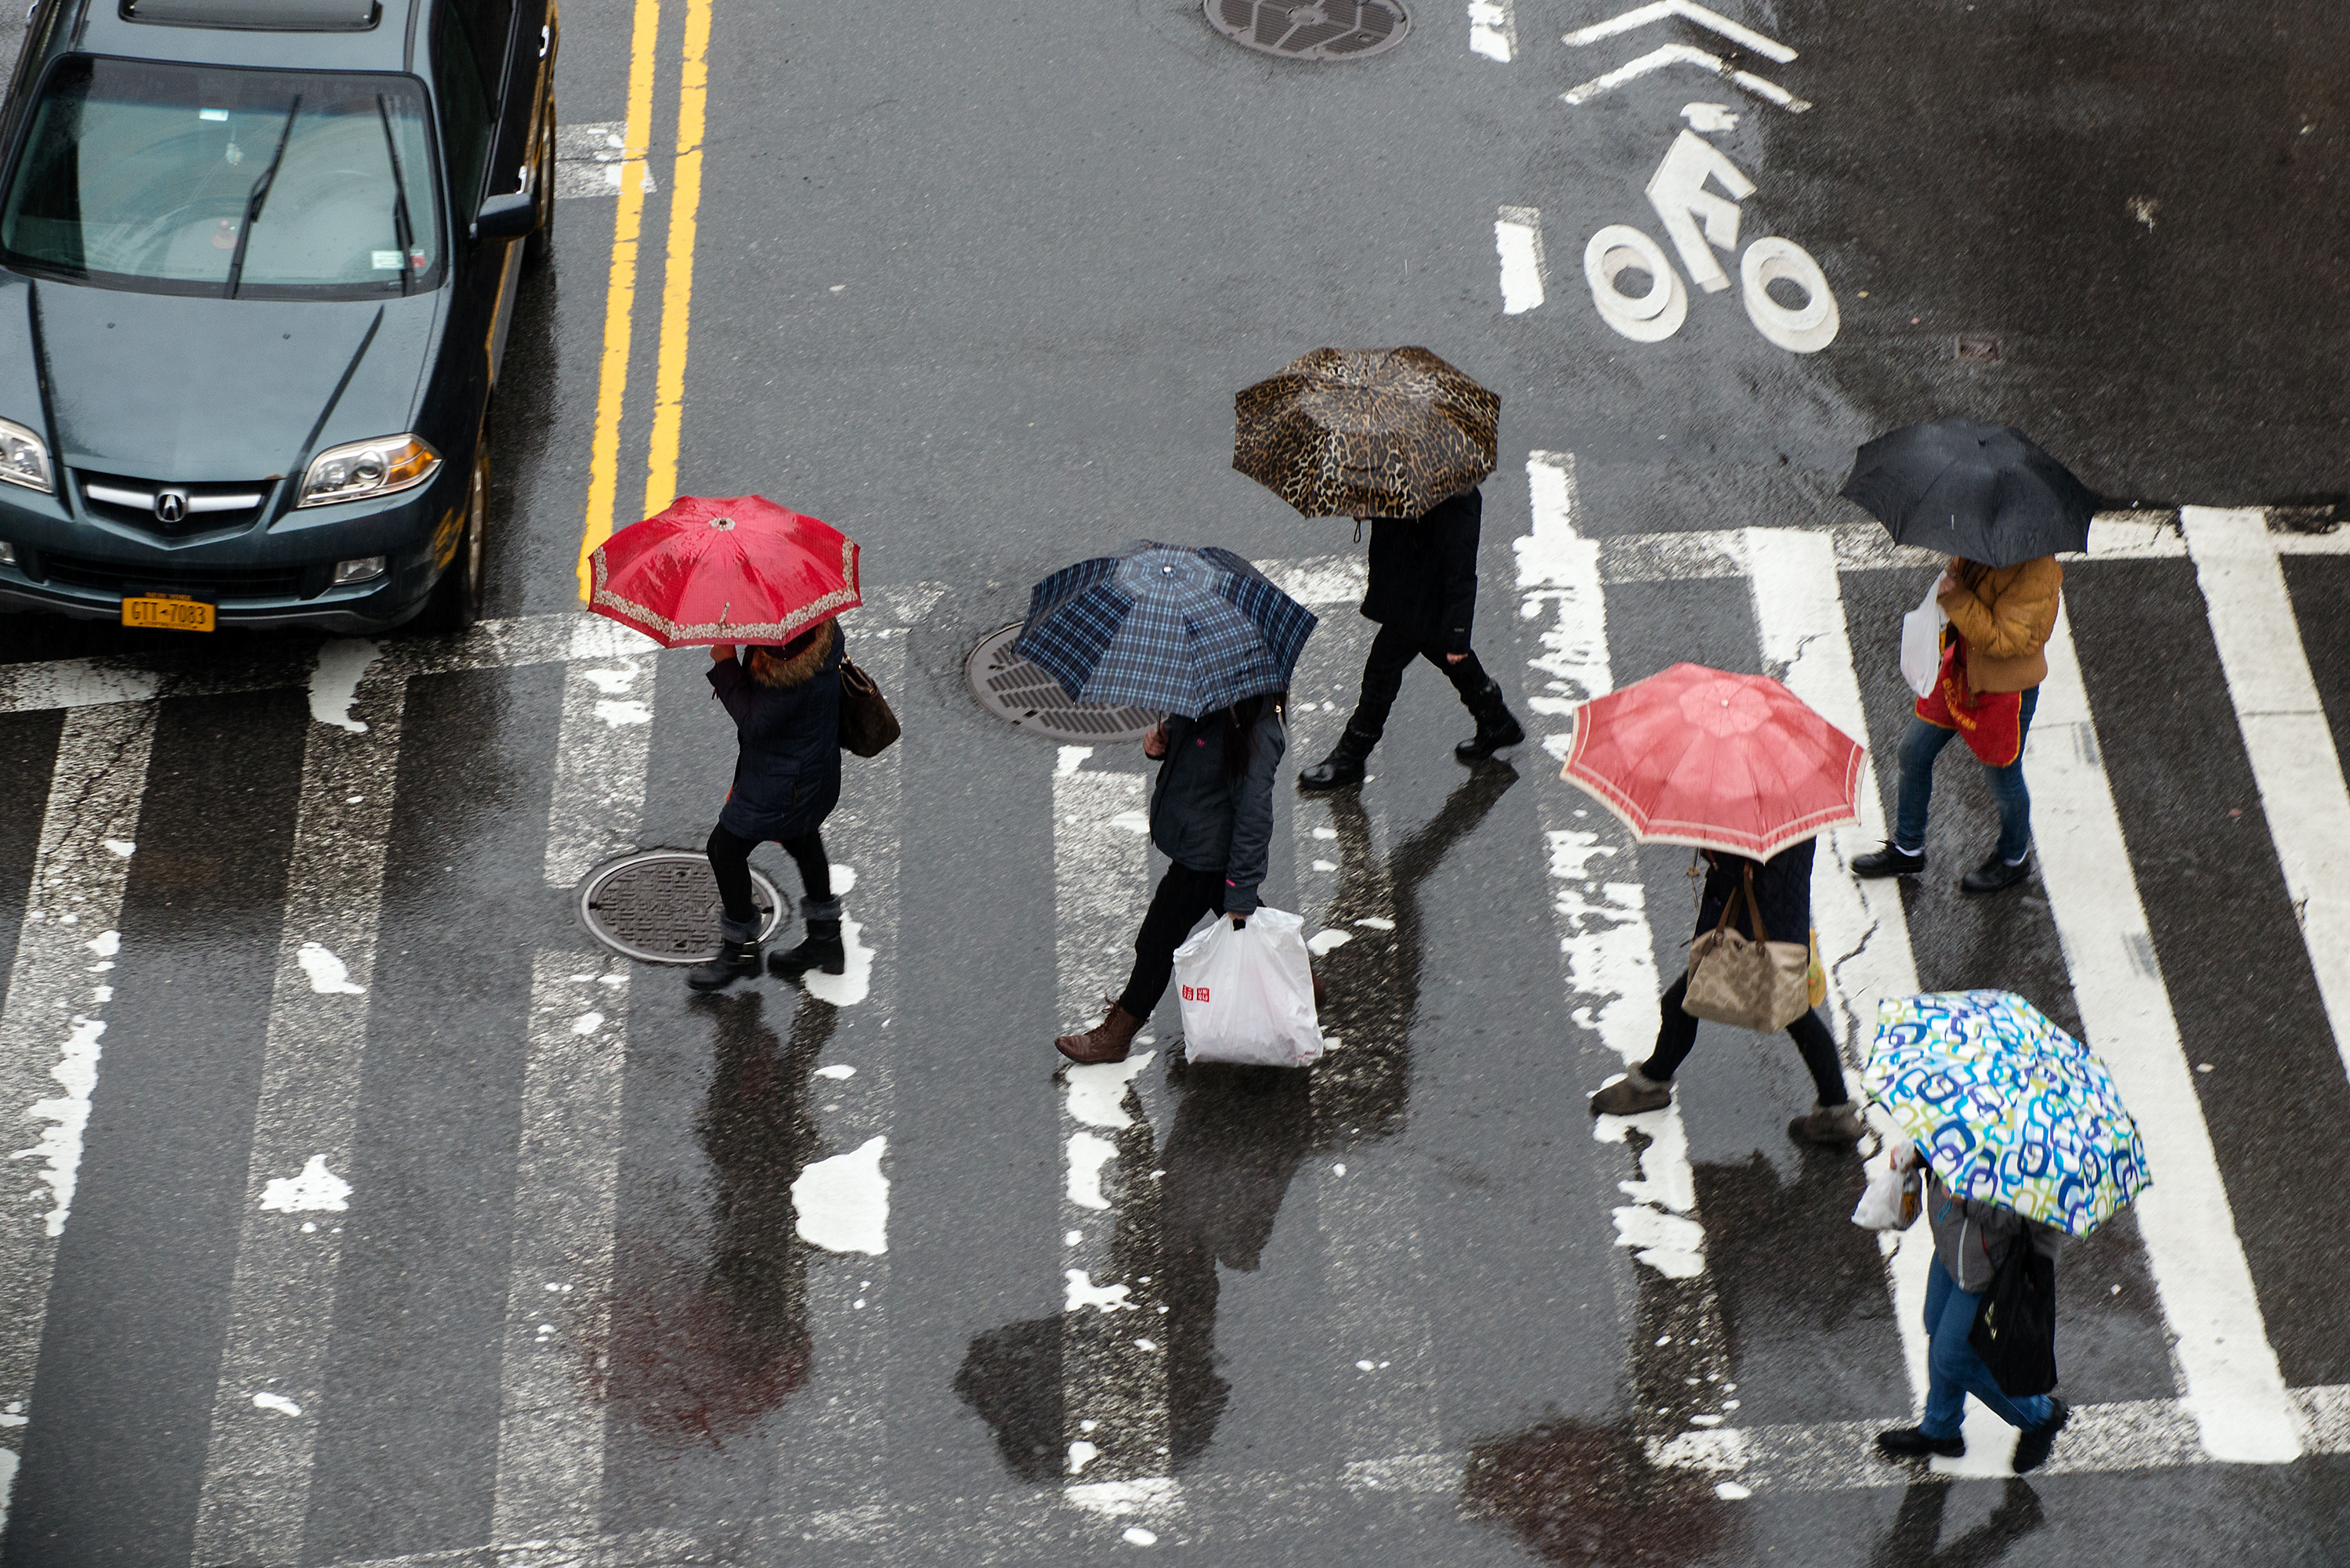 NEW YORK, NY - FEBRUARY 24: Pedestrians cross the street in Chinatown on February 24, 2016 in New York City.  According to the National Weather Service, as much as 1.5 inches of rain was expected throughout the day and a wind advisory was to begin at 6 pm. (Photo by Bryan Thomas/Getty Images) (Bryan Thomas&mdash;Getty Images)